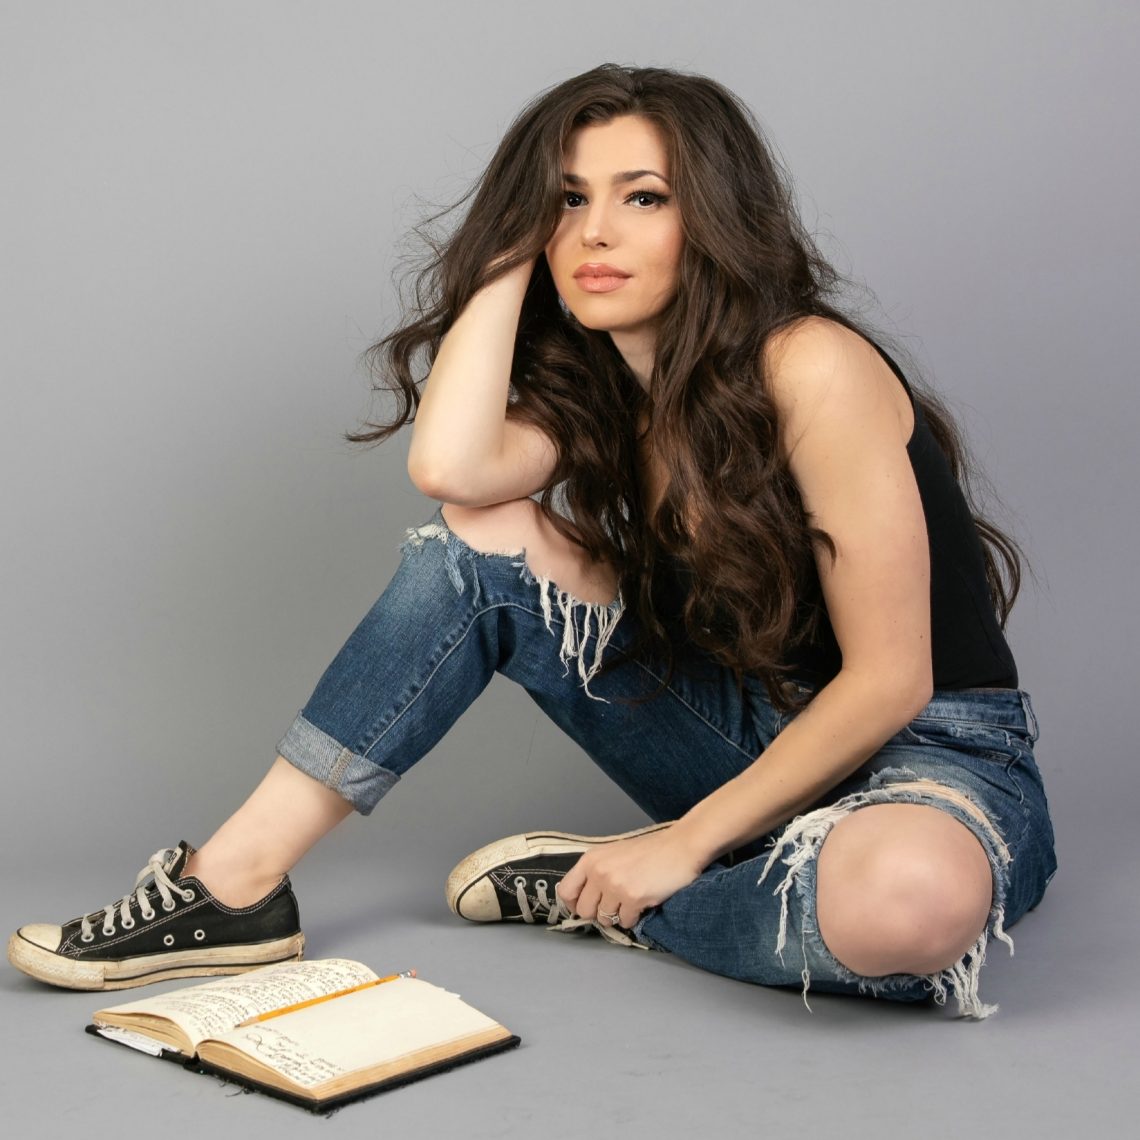 Jessica Lynn Shares Her Video for ‘Now or Never’